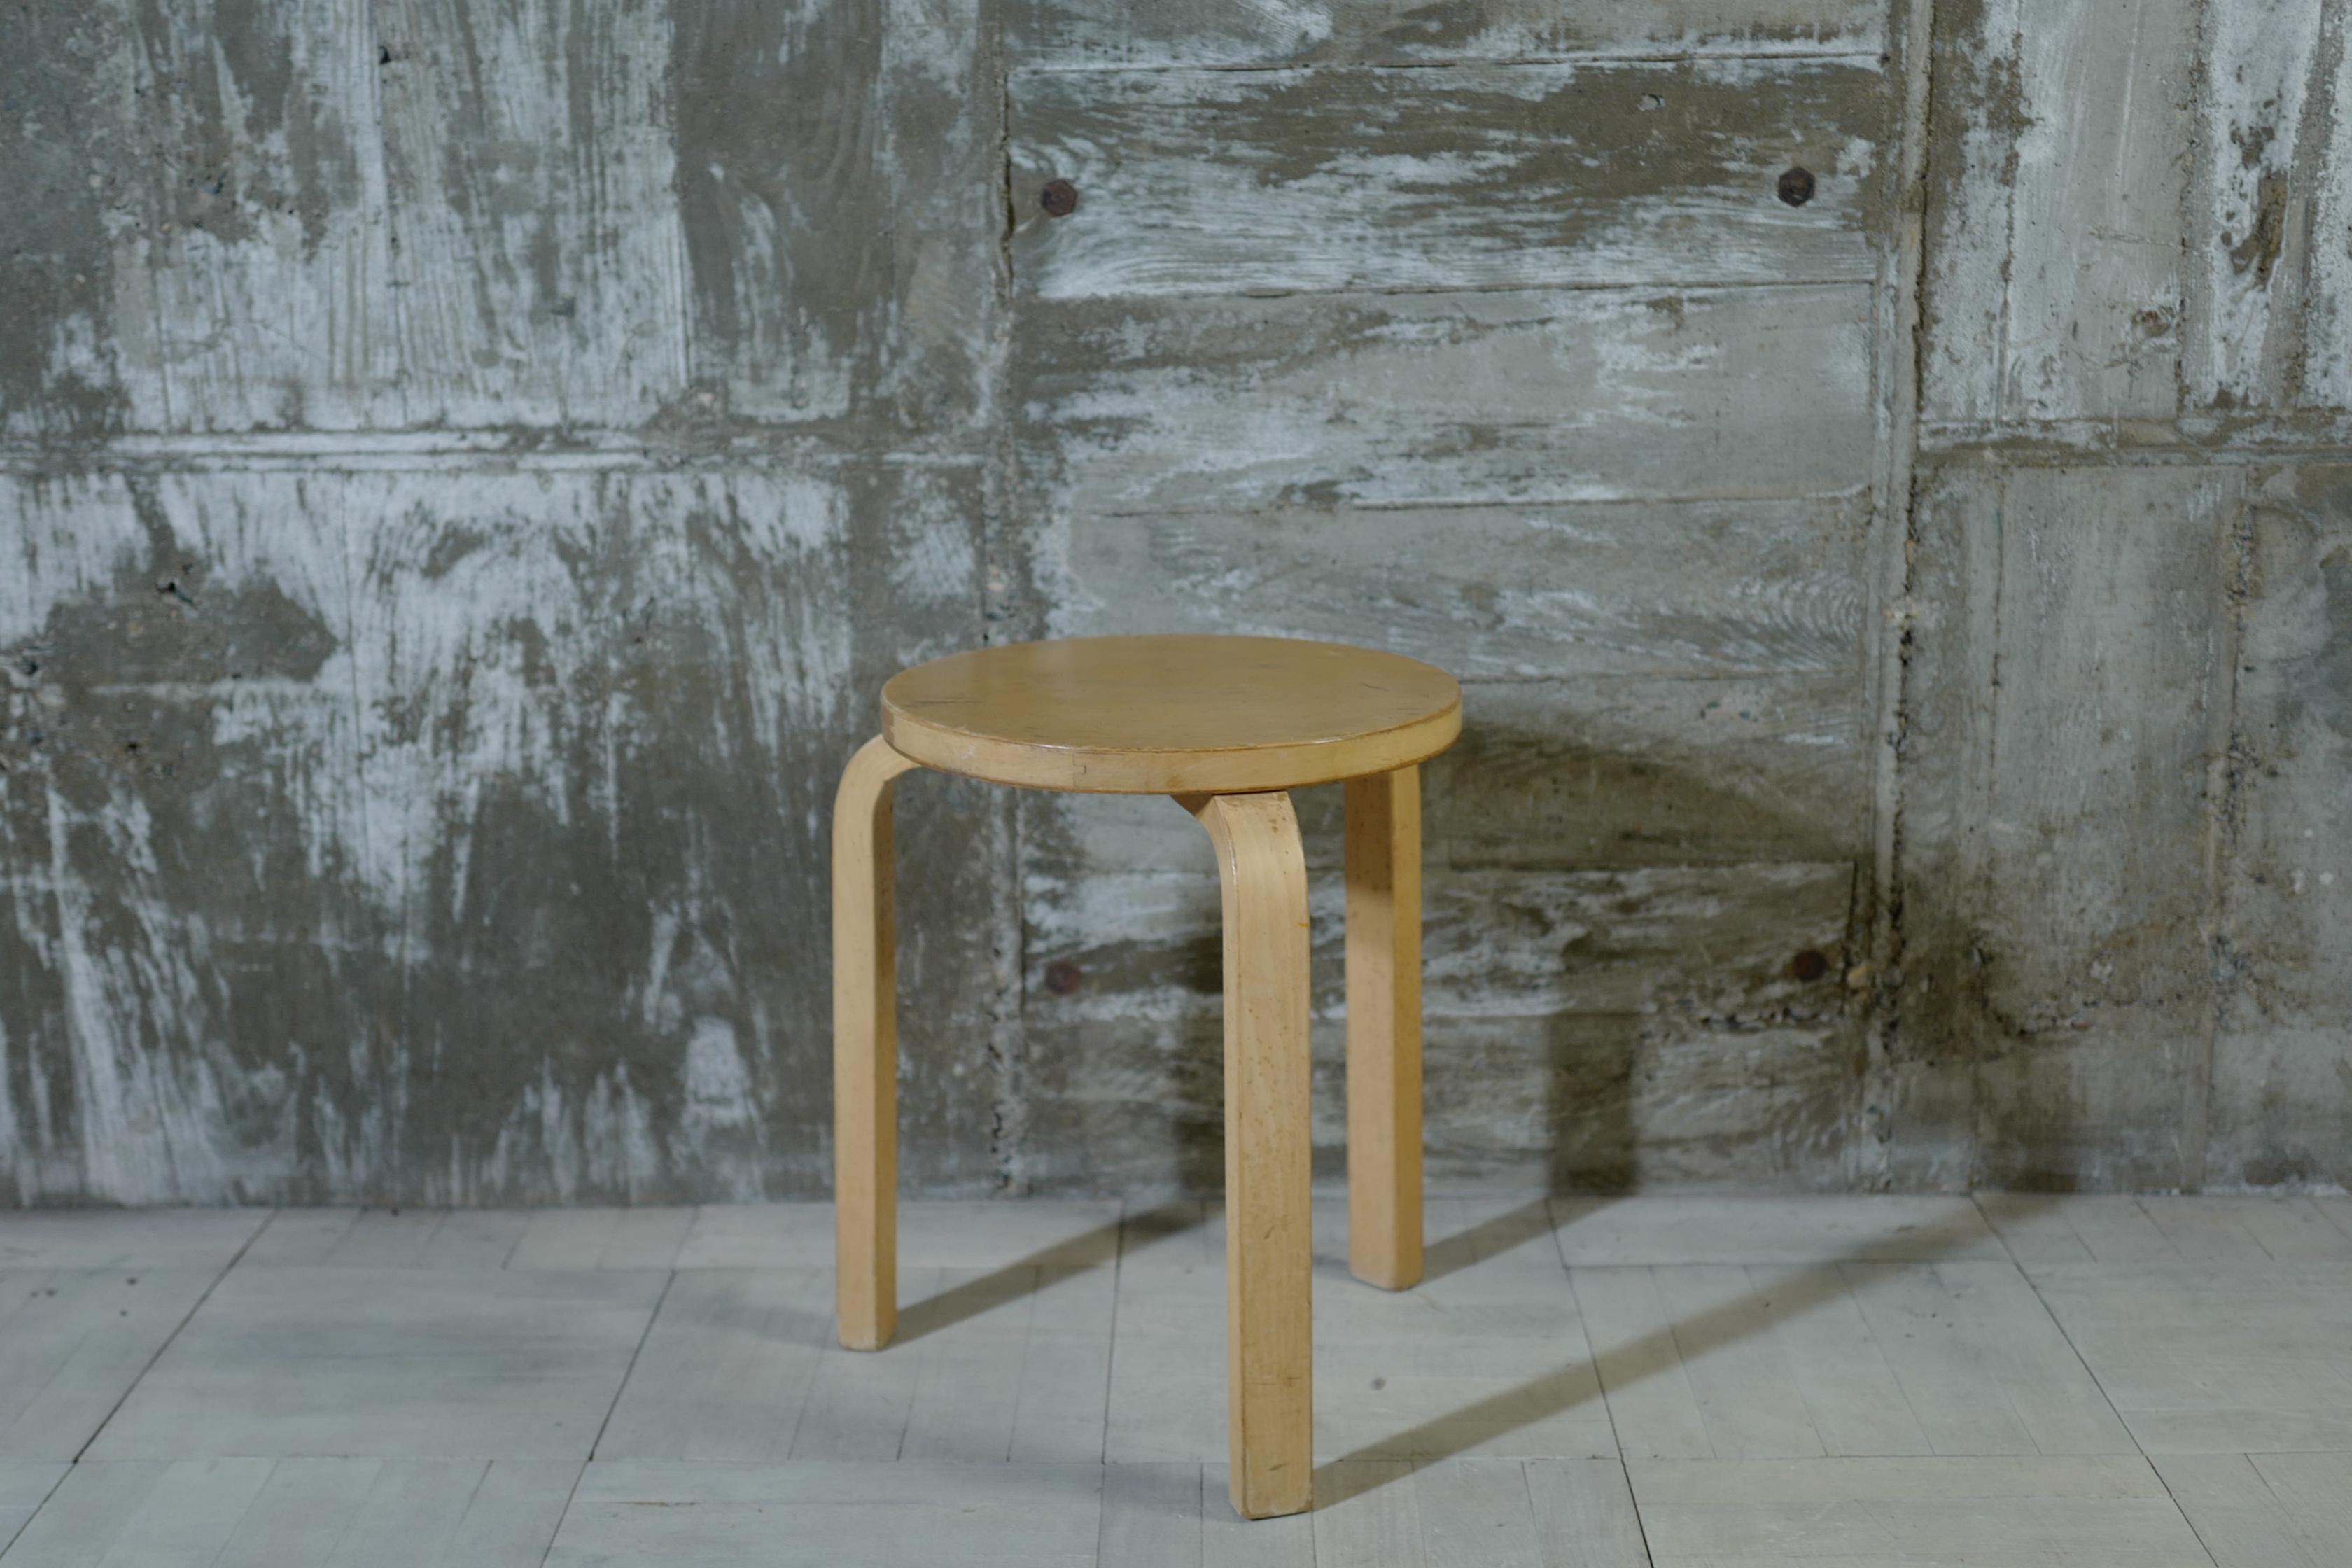 Designed by Alvar Aalto.
This stool60 was manufactured in the 1950s.
There is some damage to the seat.